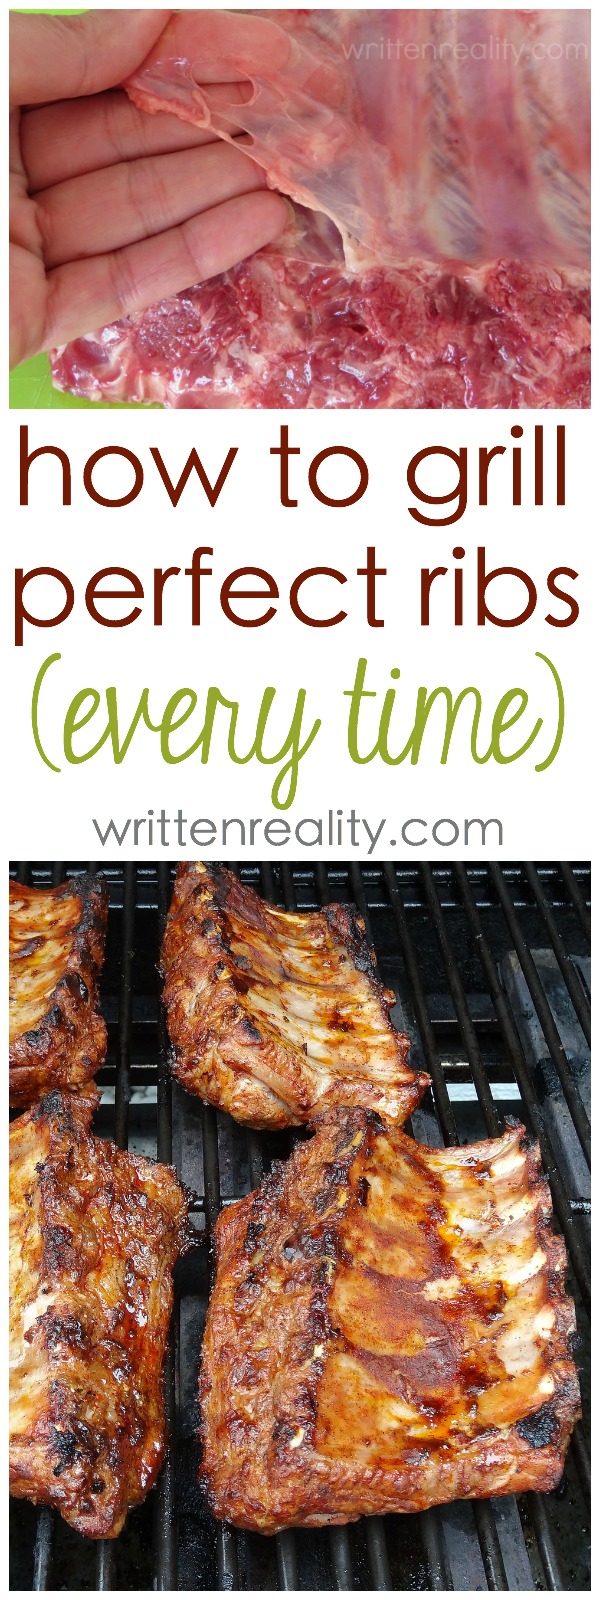 How to cook ribs on the grill